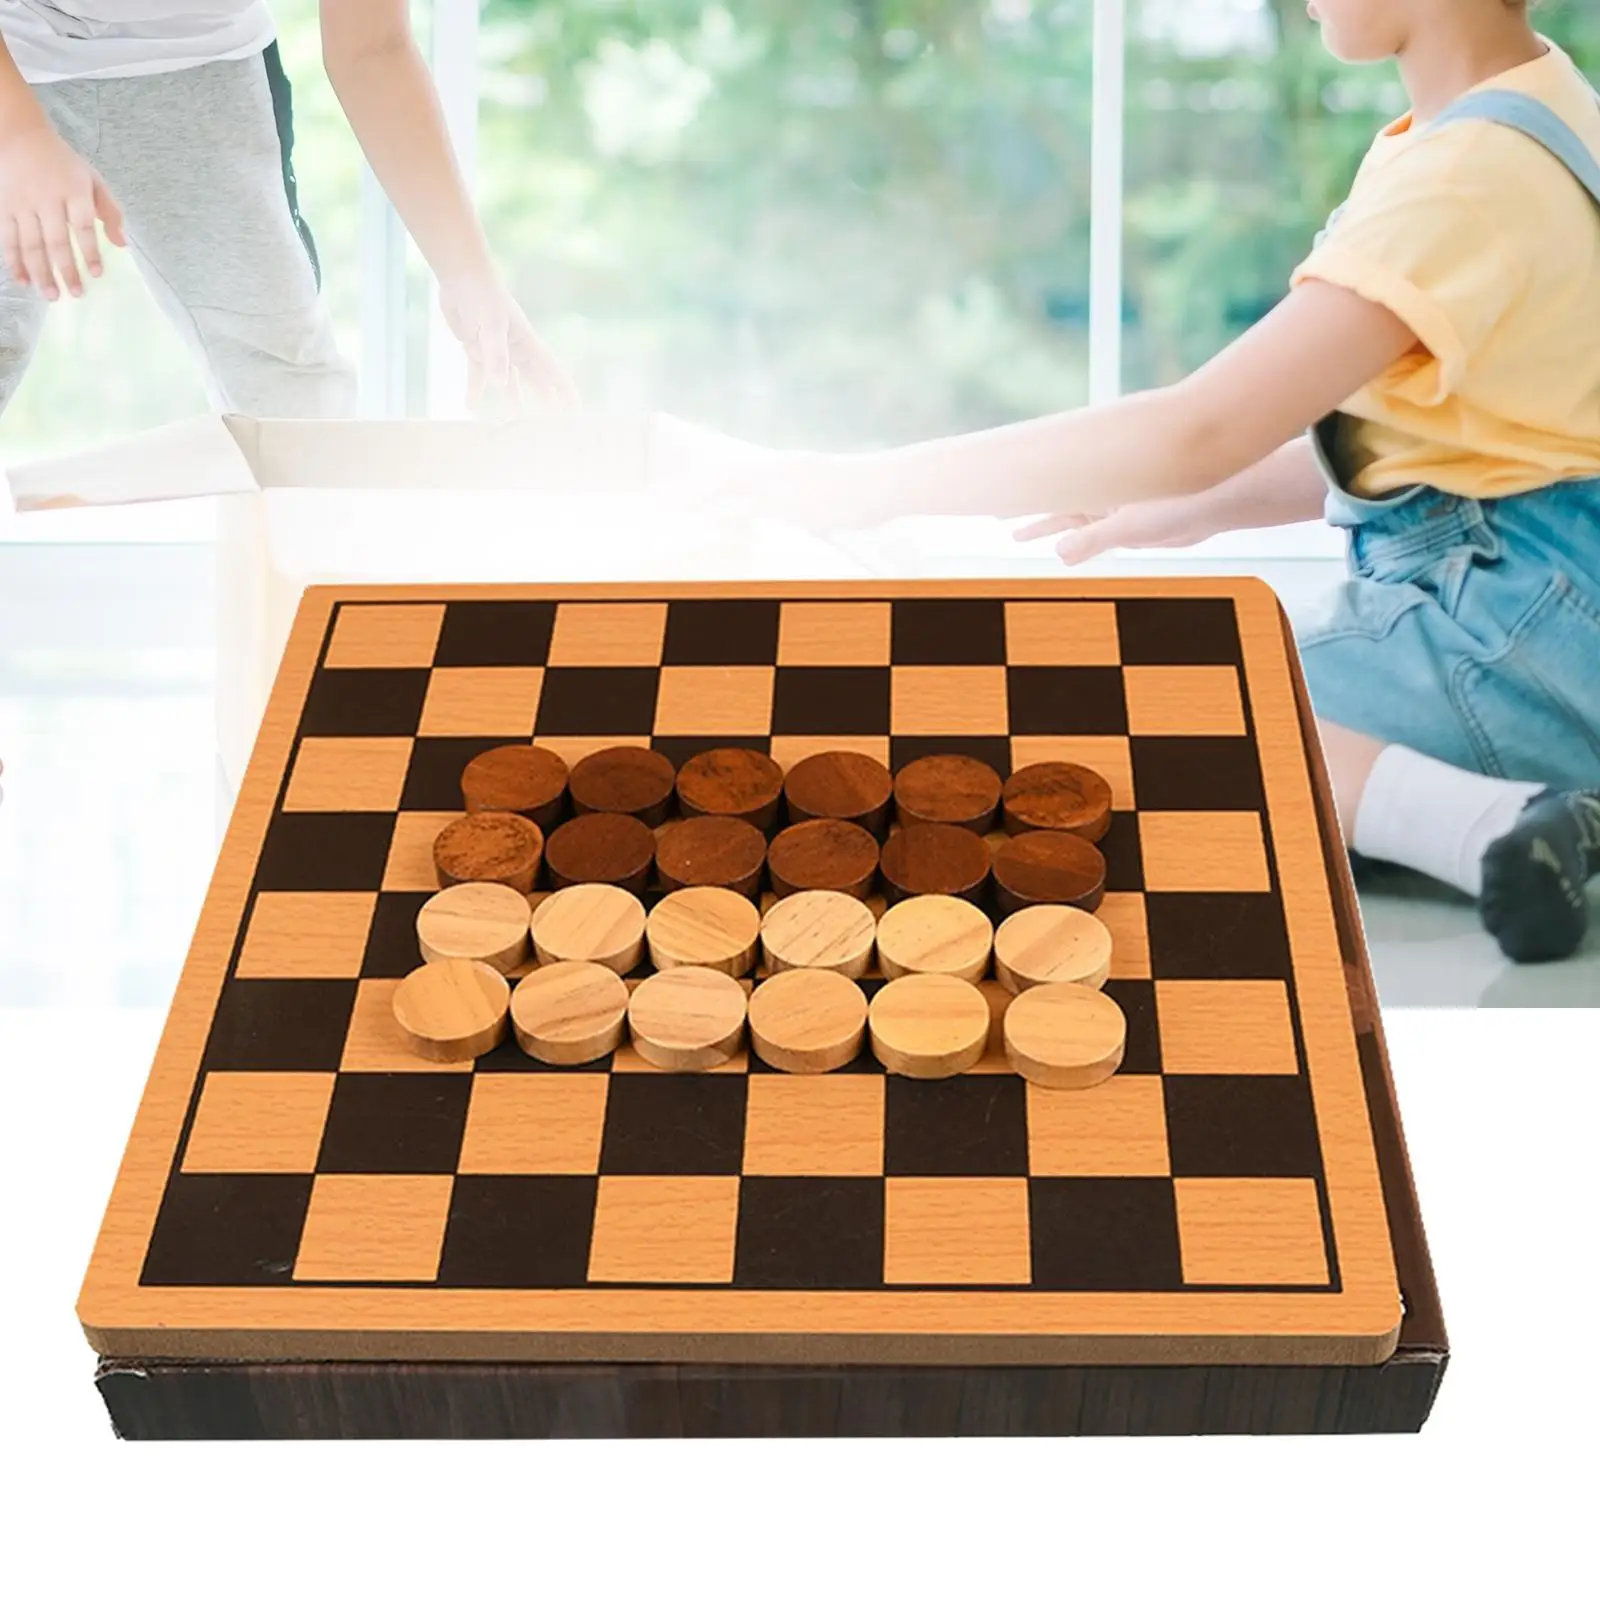 Chess Game Set Entertainment Decor Accessories Chess Board Figurine Hand Carved Piece for Kids Boys Girls Travel Desktop